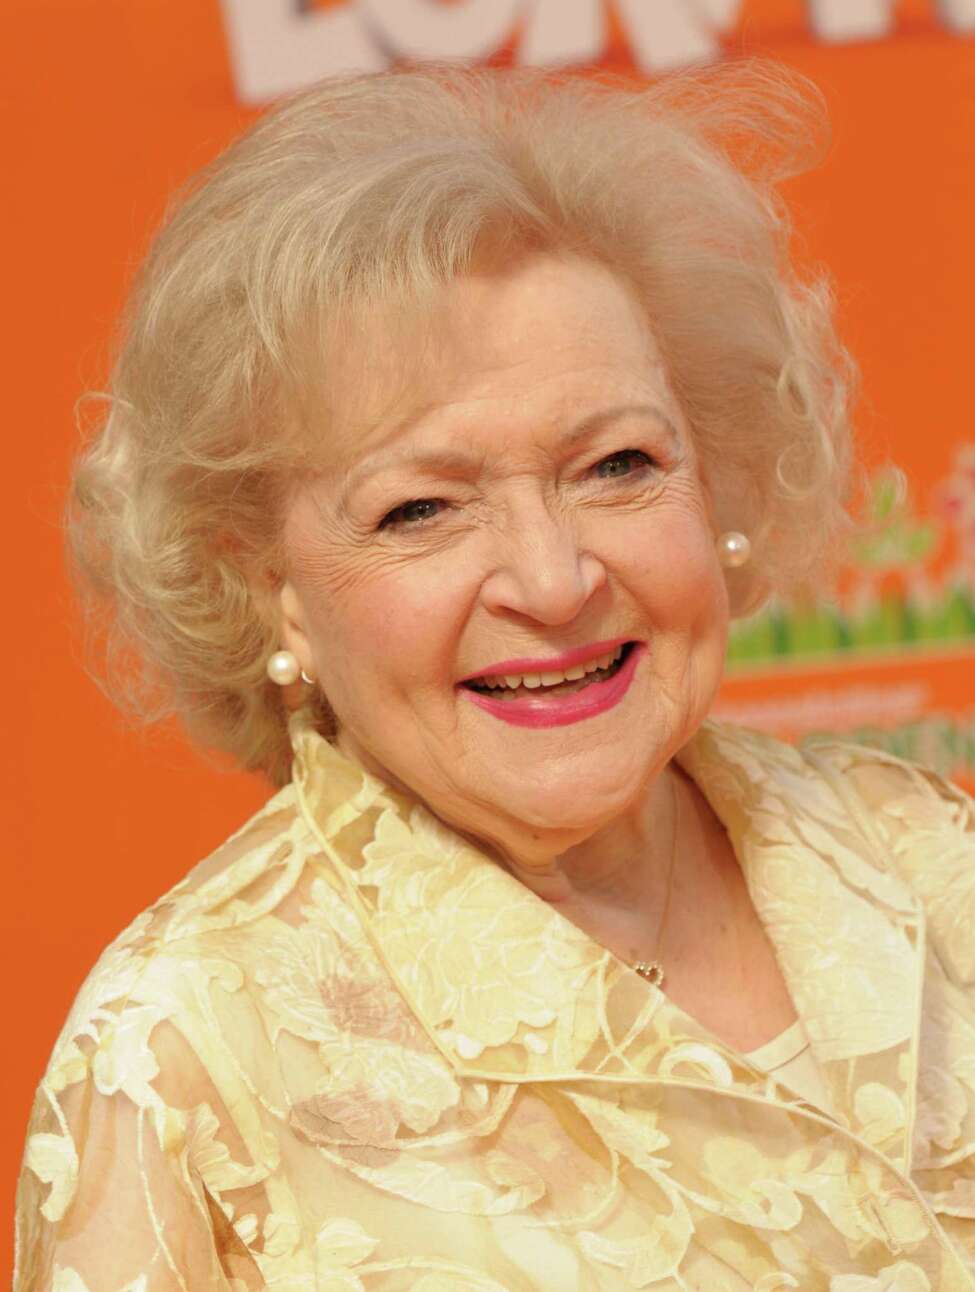 Betty White heads to DC, talks passion for animals